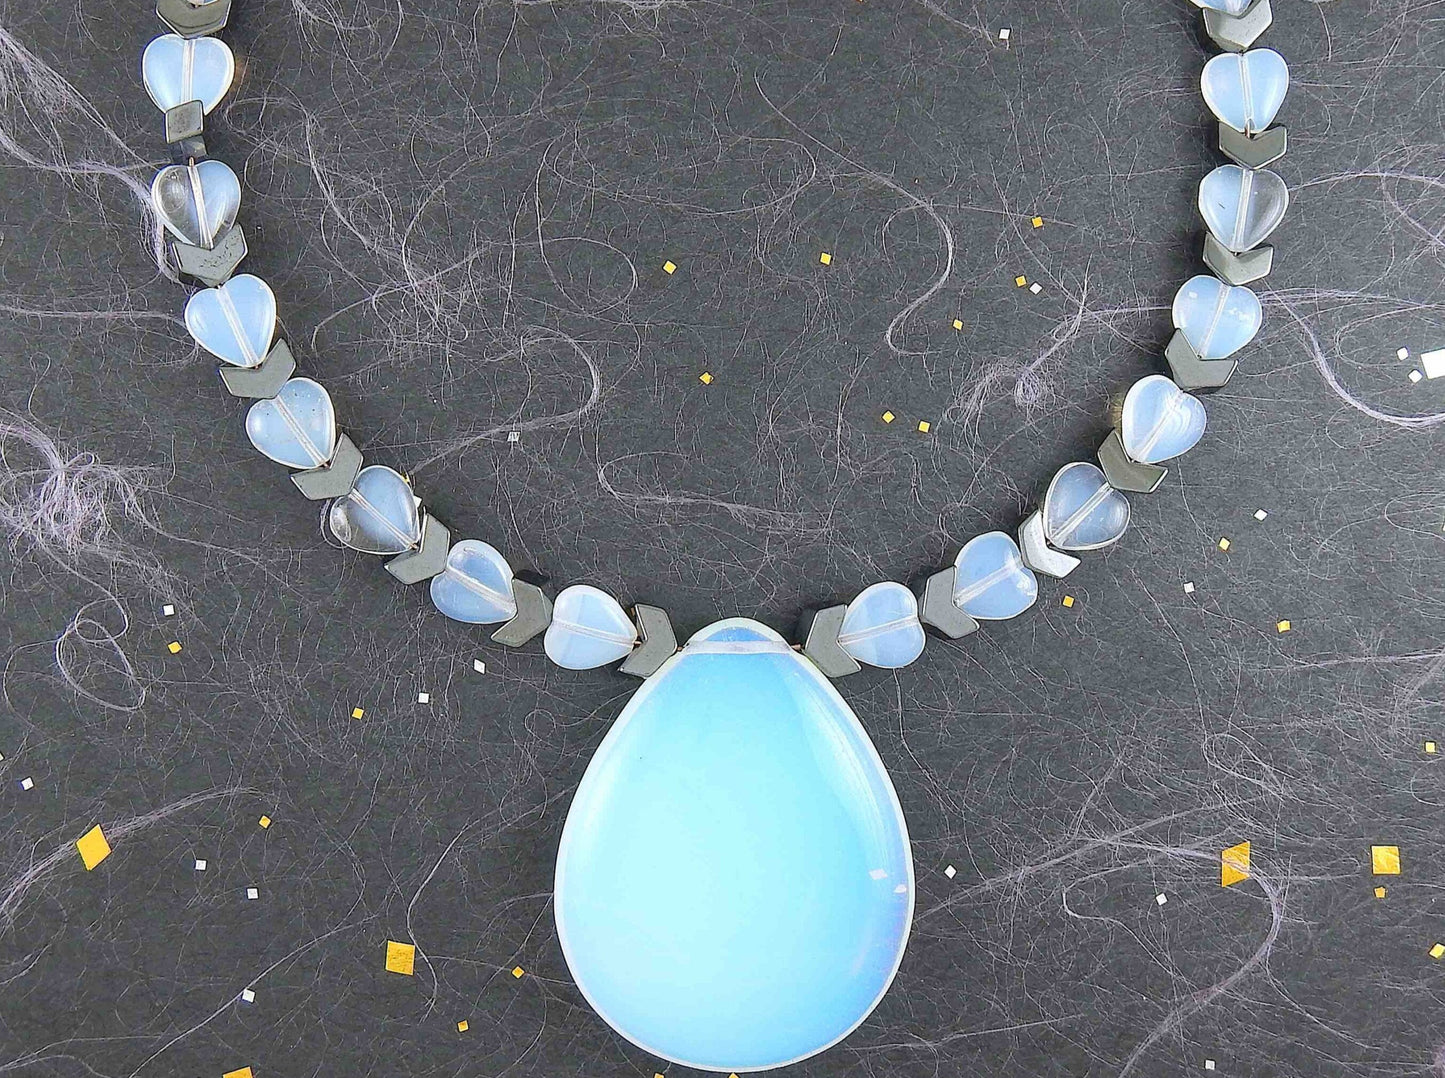 Choker necklace with 50mm synthetic moonstone (opalite) drop pendant, tiny hearts, hematite chevrons, metal